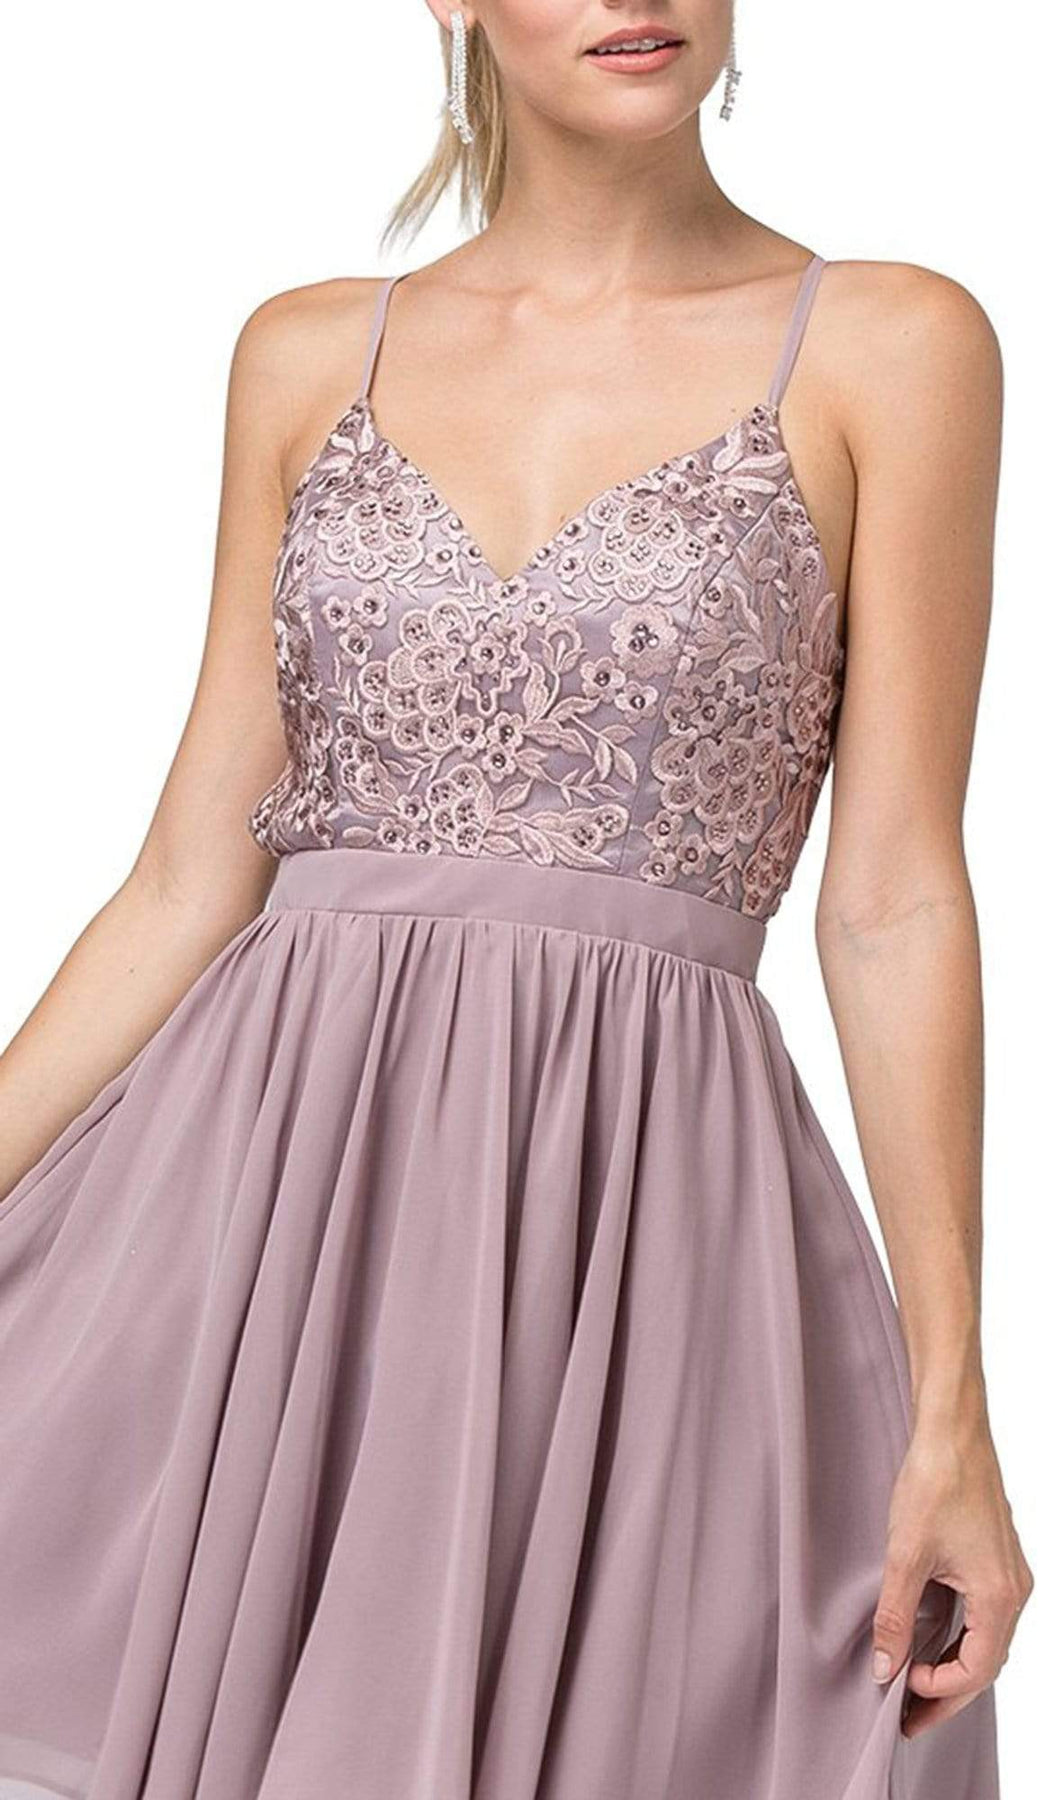 Dancing Queen - 3089 Embroidered V-neck A-line Cocktail Dress Homecoming Dresses